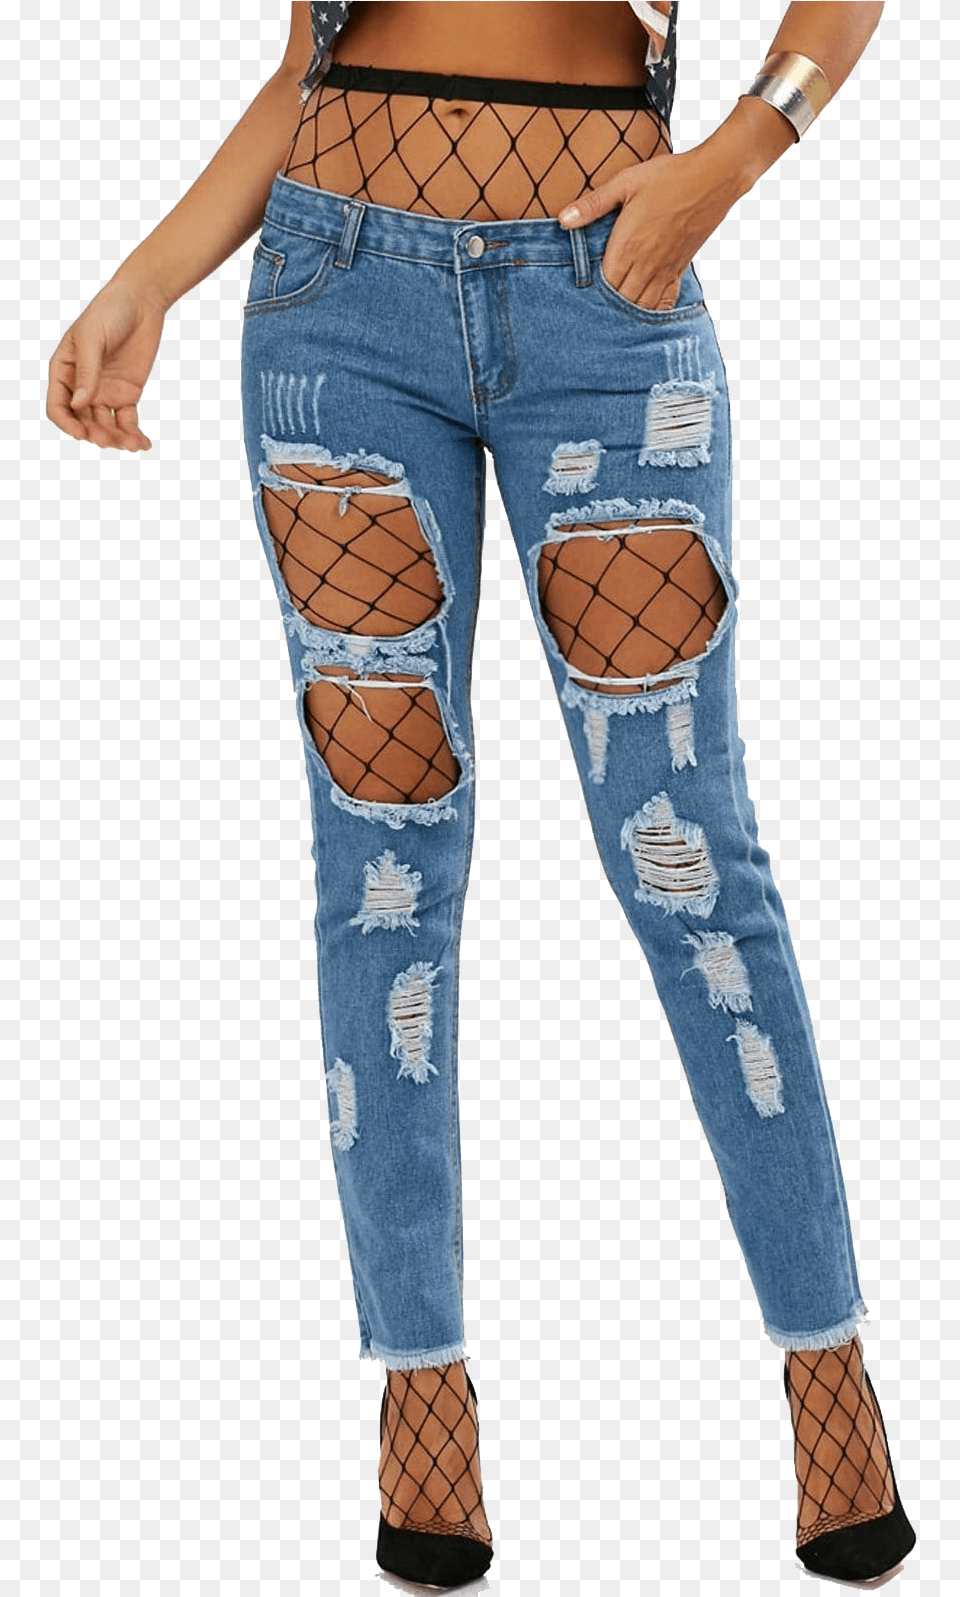 Ripped Jean Sims 4 Ripped Jeans With Fishnets, Clothing, Pants, High Heel, Footwear Png Image